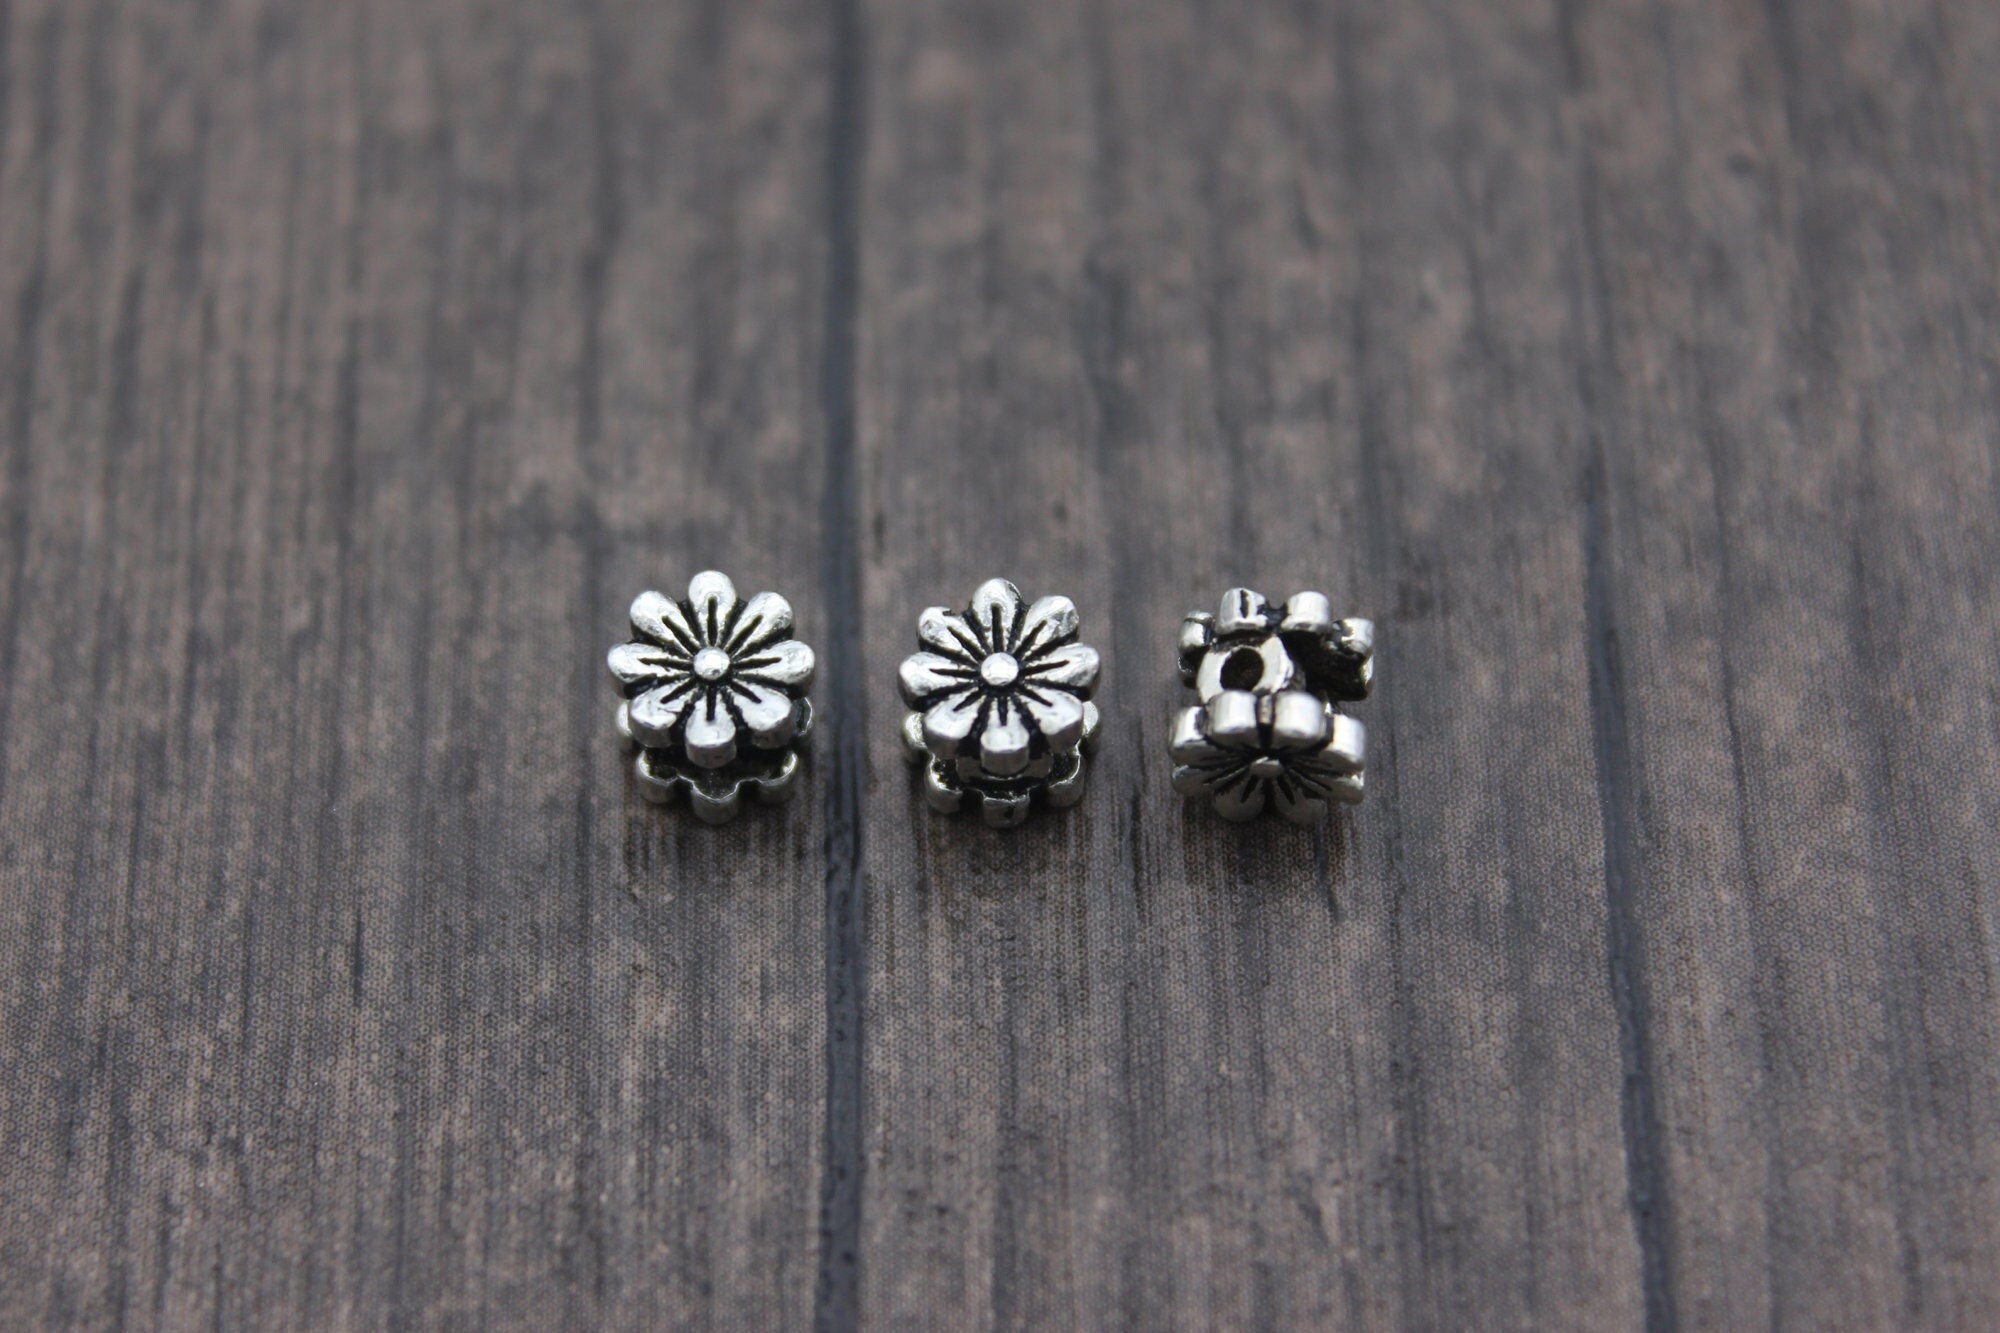 4x OXIDIZED STERLING SILVER FLOWER RONDELLE SPACER BEAD 6mm #3012 